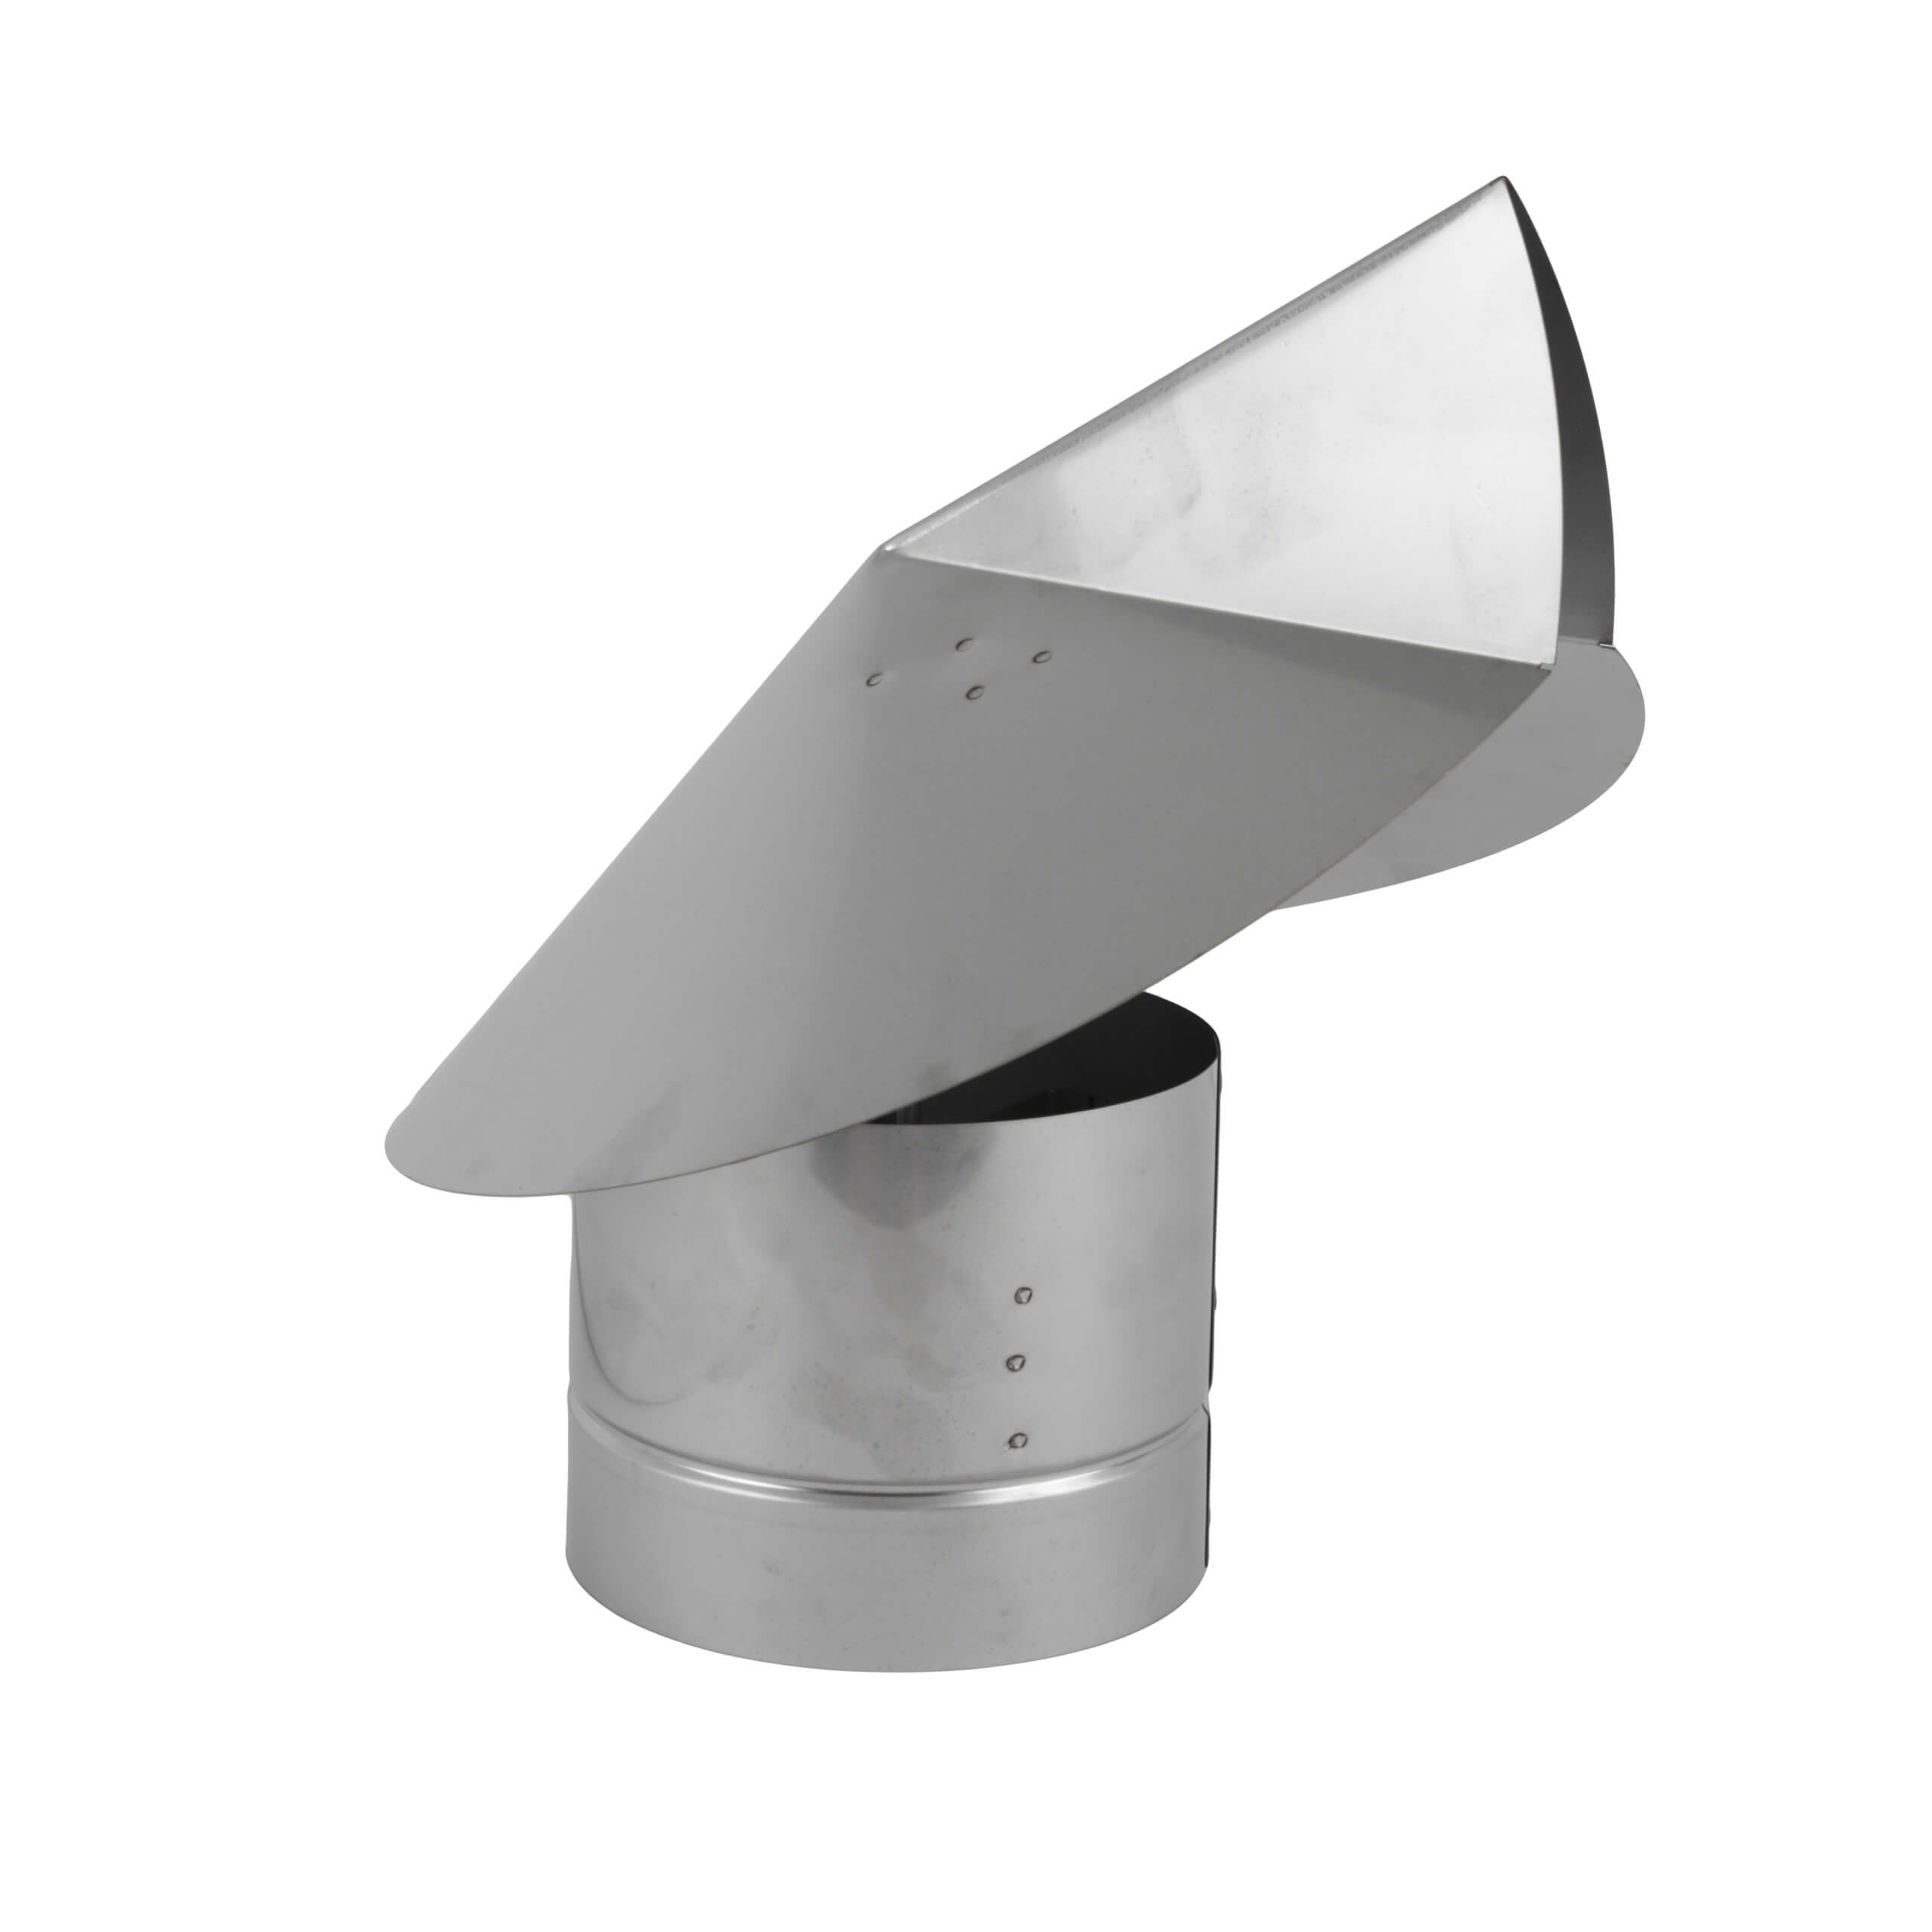 FOXY METAL FABRICATION CHIMNEY CAP,RAIN CAP,CHIMNEY COWL TO FIT 4/100MM FLUE PIPE/STOVE PIPE